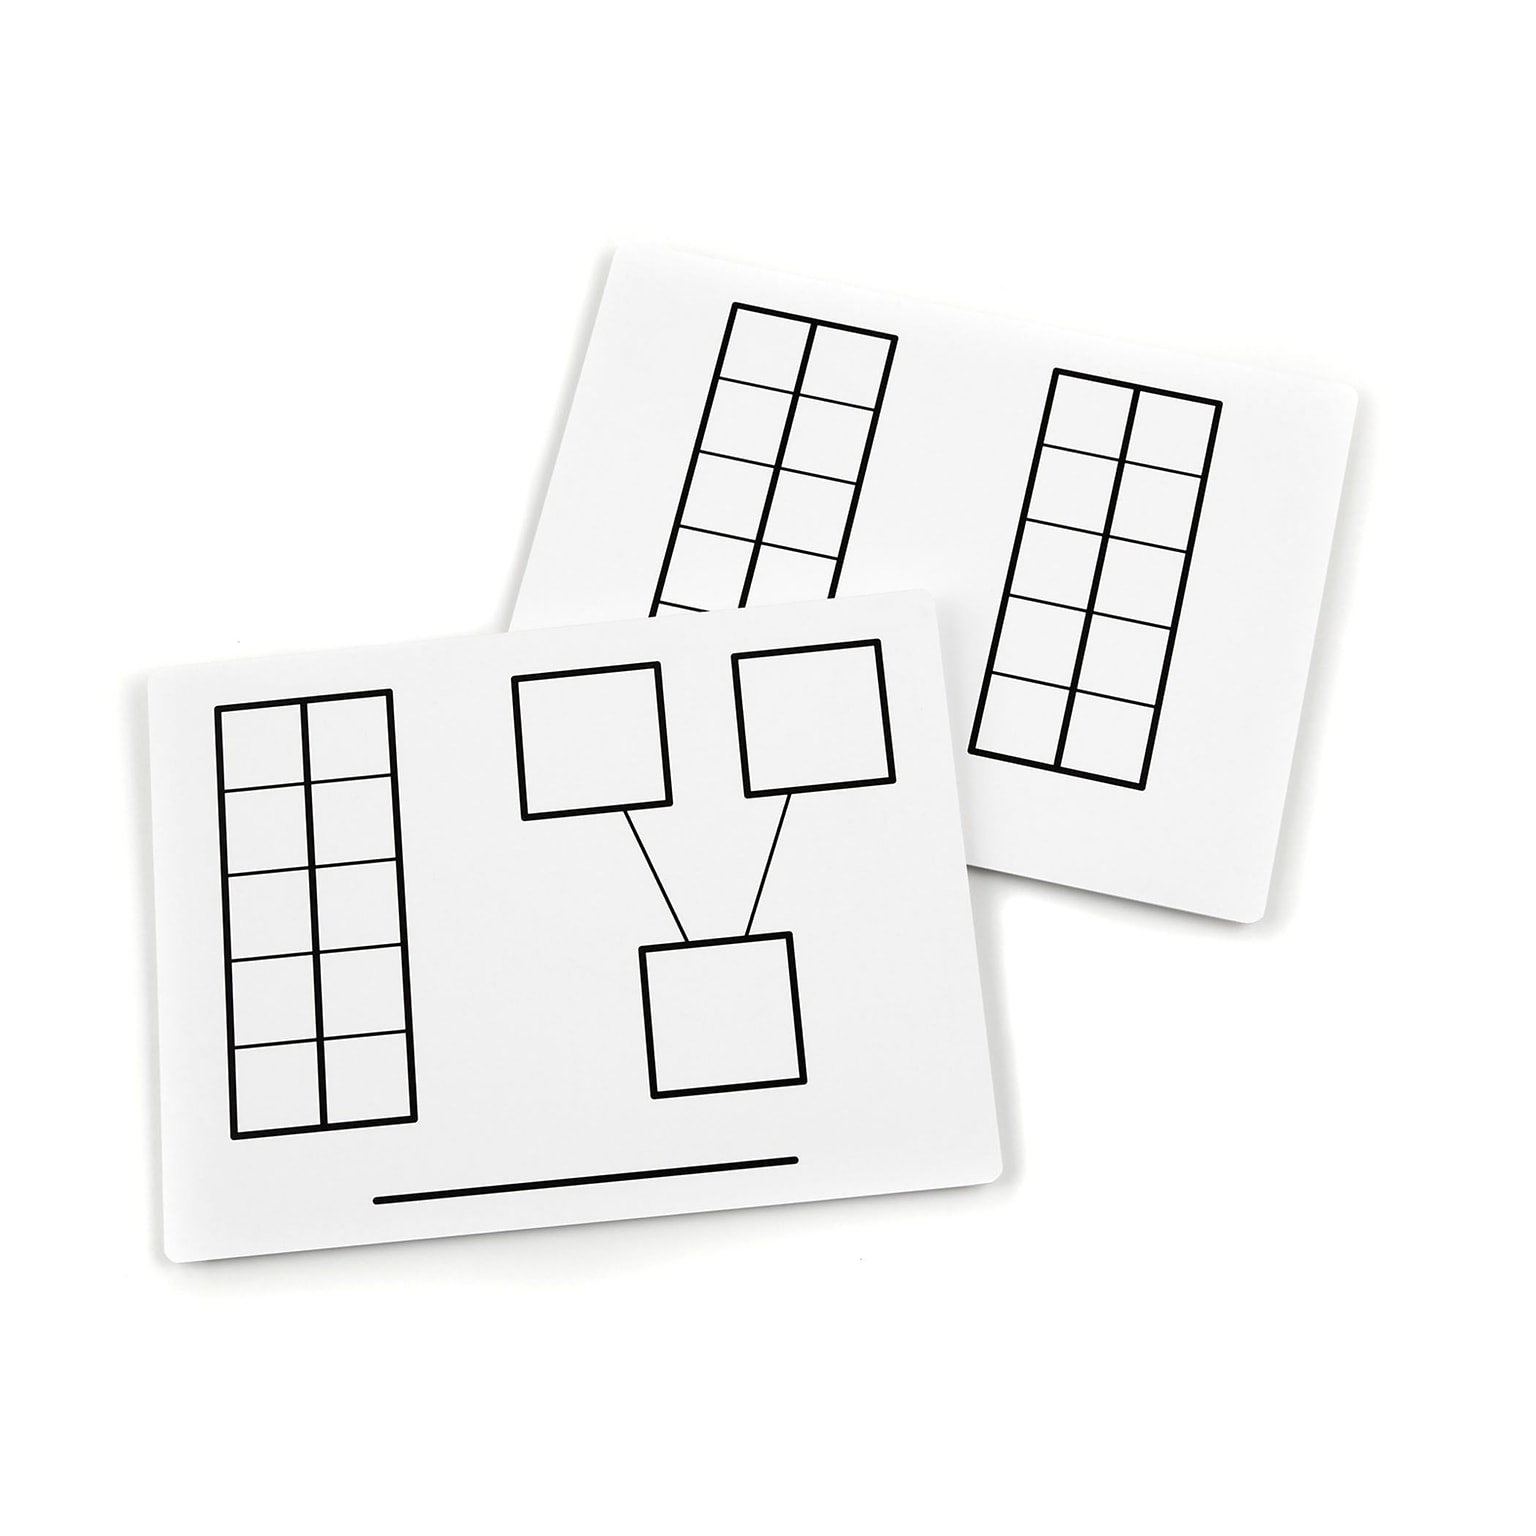 Didax Write And Wipe Ten Frame Mat, 9 x 12, 10/Pack